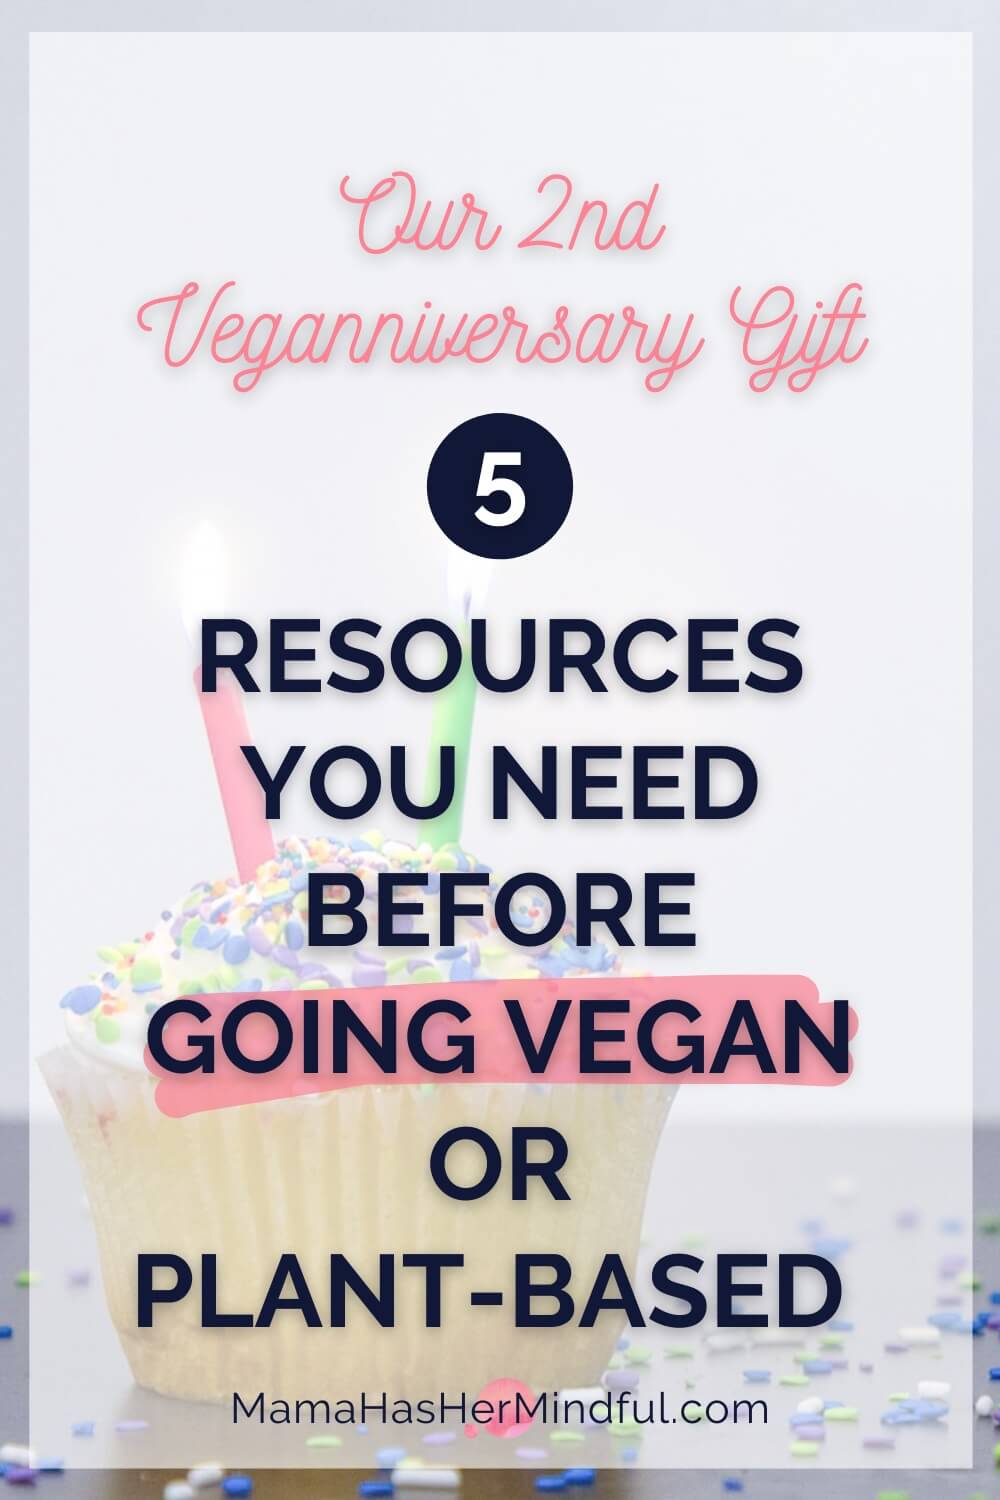 5 Resources You Need Before Going Vegan (or Plant-Based) + It\'s Our 2nd Veganniversary